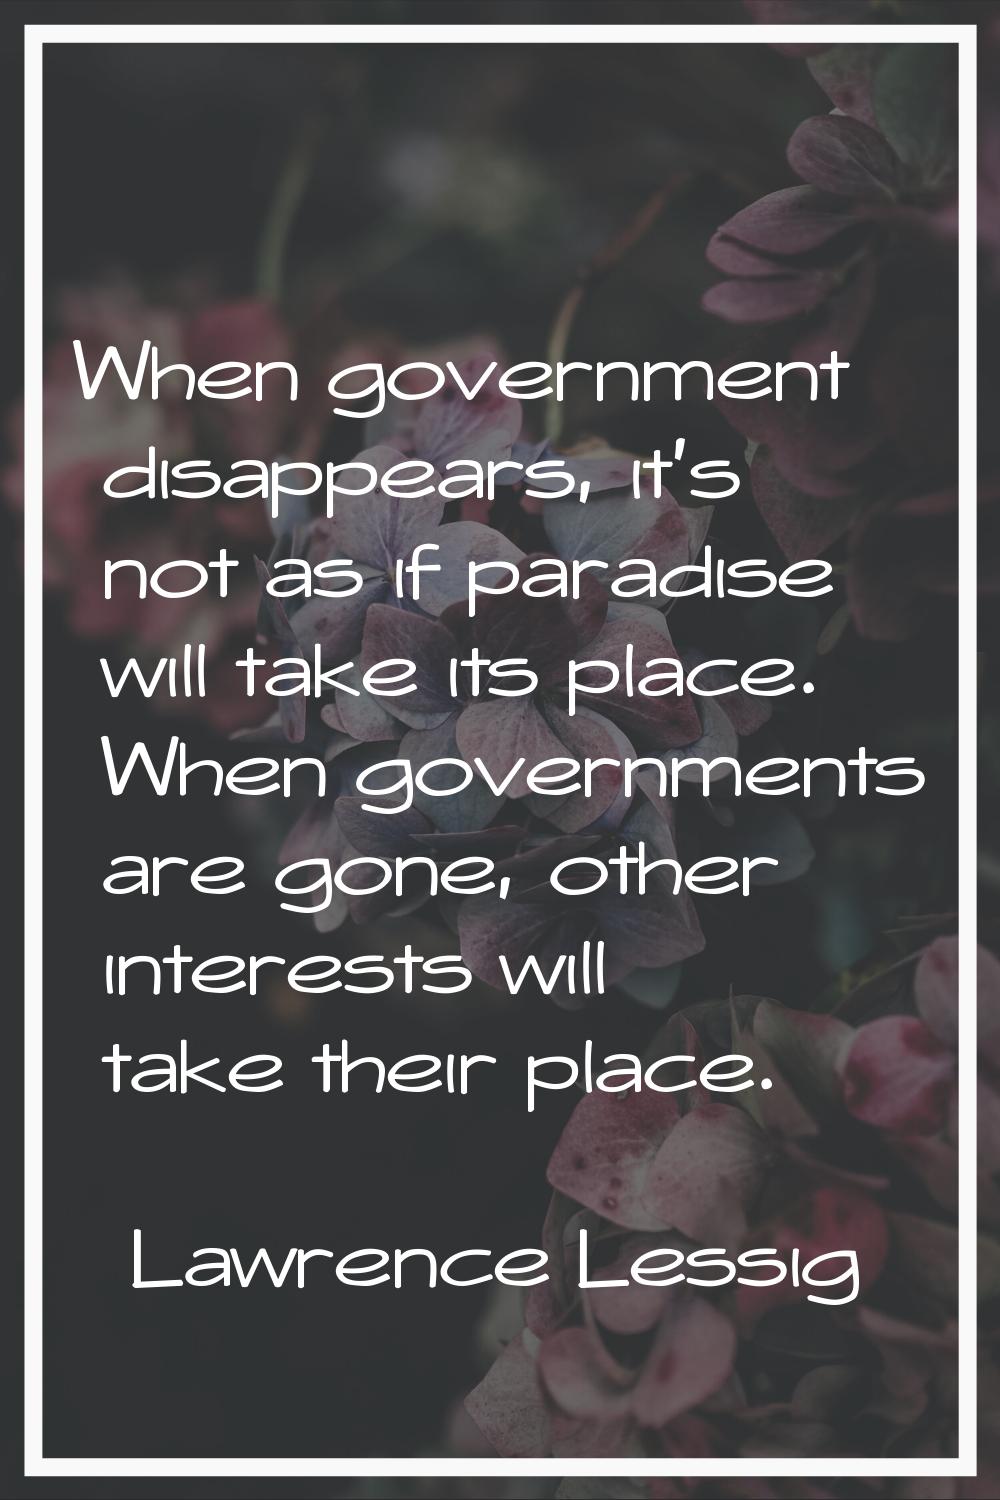 When government disappears, it's not as if paradise will take its place. When governments are gone,